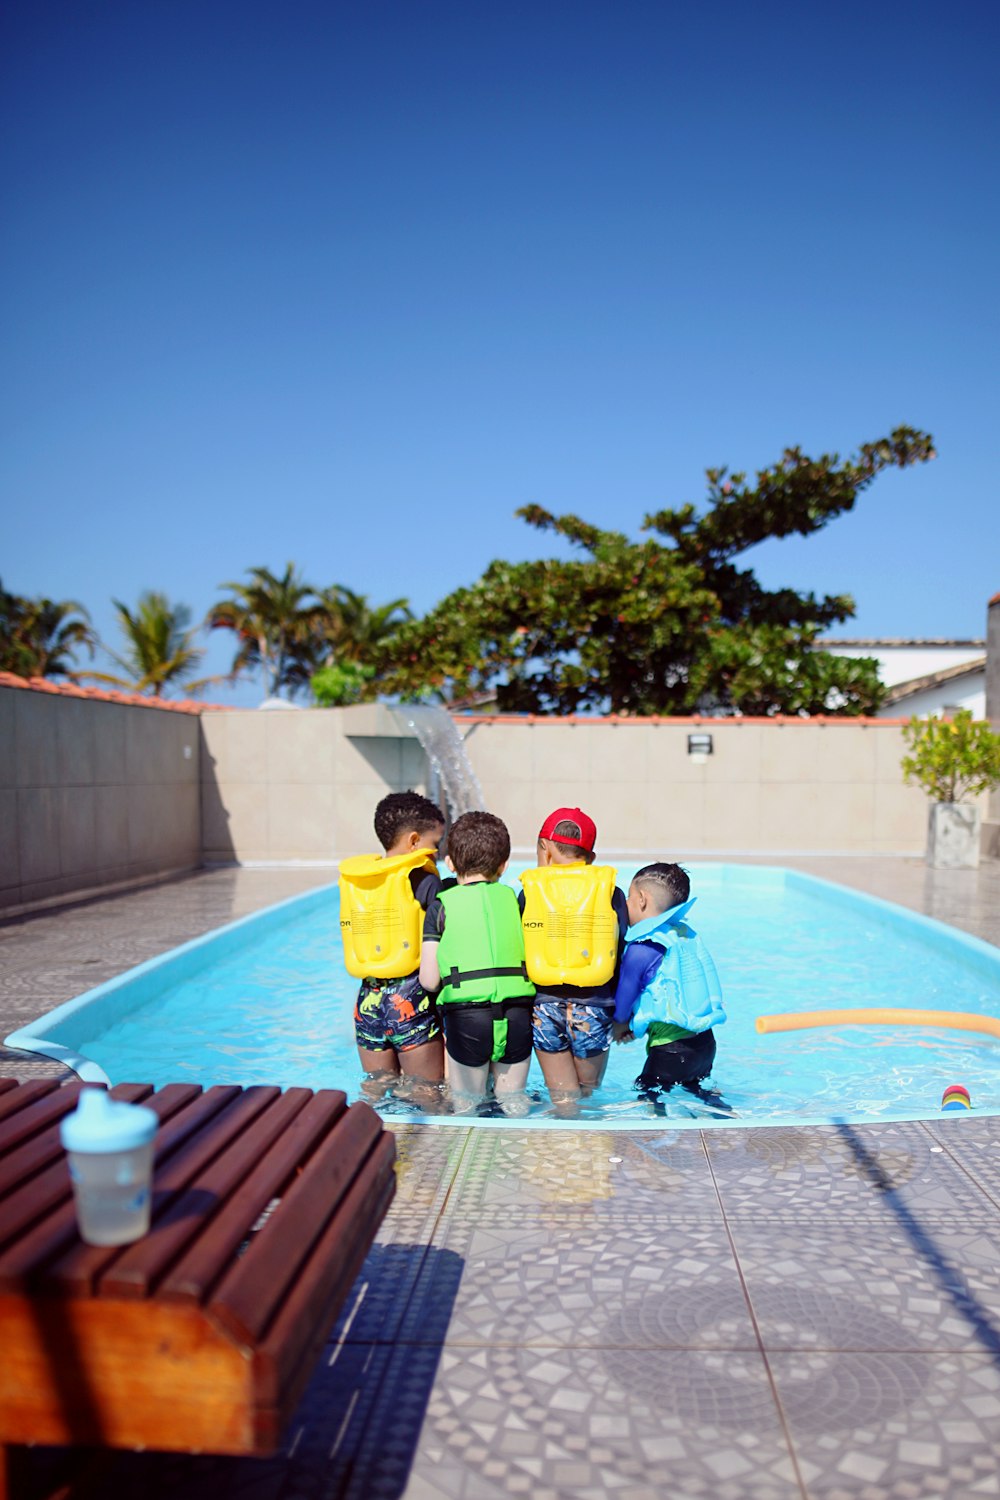 a group of young boys standing next to a swimming pool